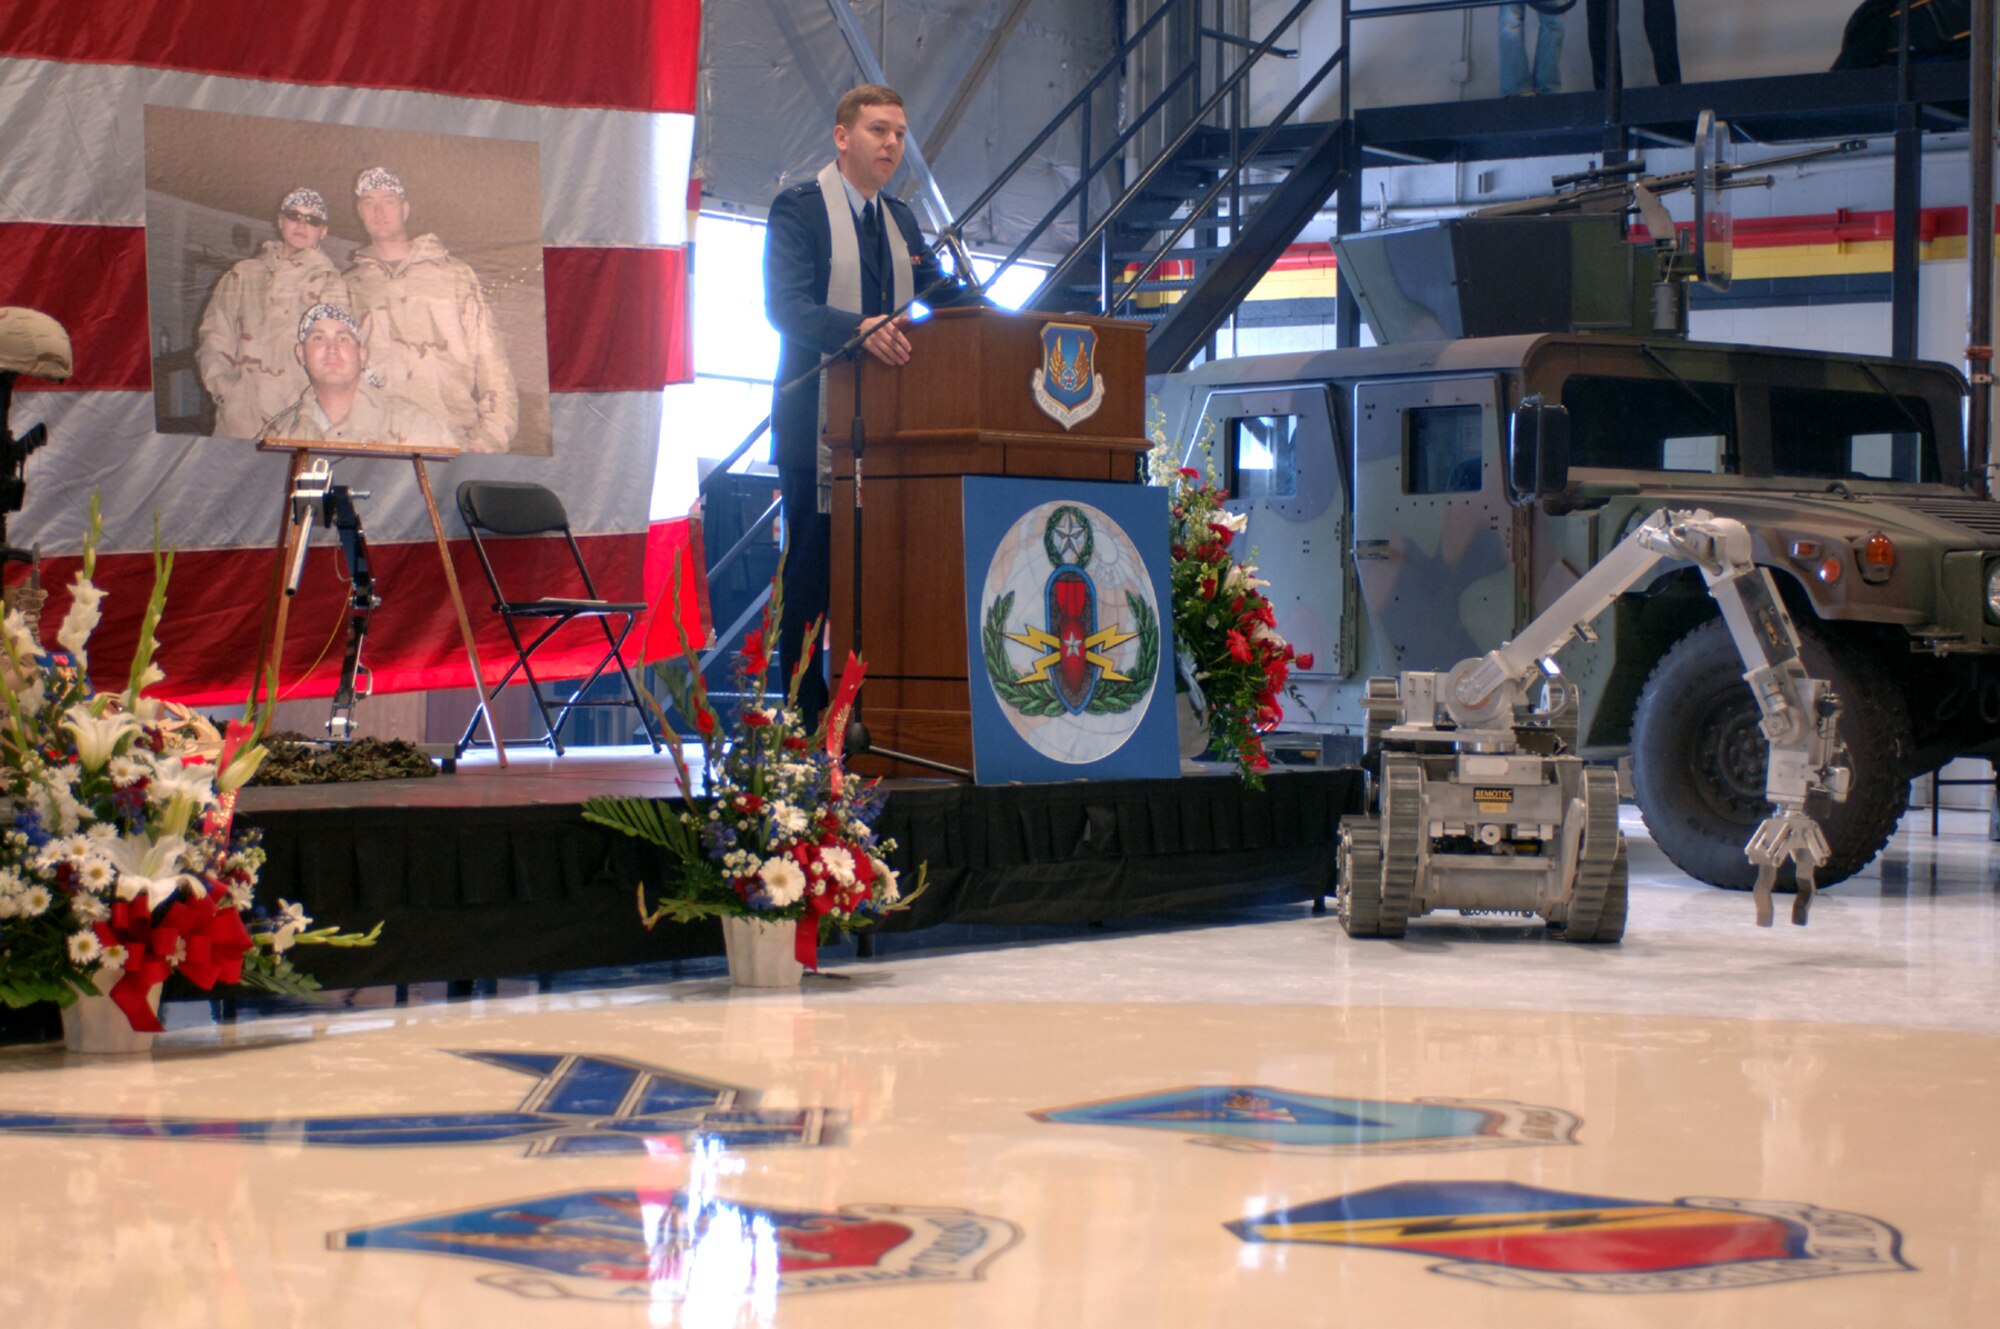 Chaplain Capt Alex F. Jack paid tribute during a memorial service to the fallen comrades at Hill Air Force Base who were killed-in-action in Iraq earlier this week as a result of a car bomb. The three Airmen killed are Tech Sergeant Timothy R. Weiner, Senior Airman Elizabeth A. Loncki and Senior Airman Daniel B. Miller, Jr.